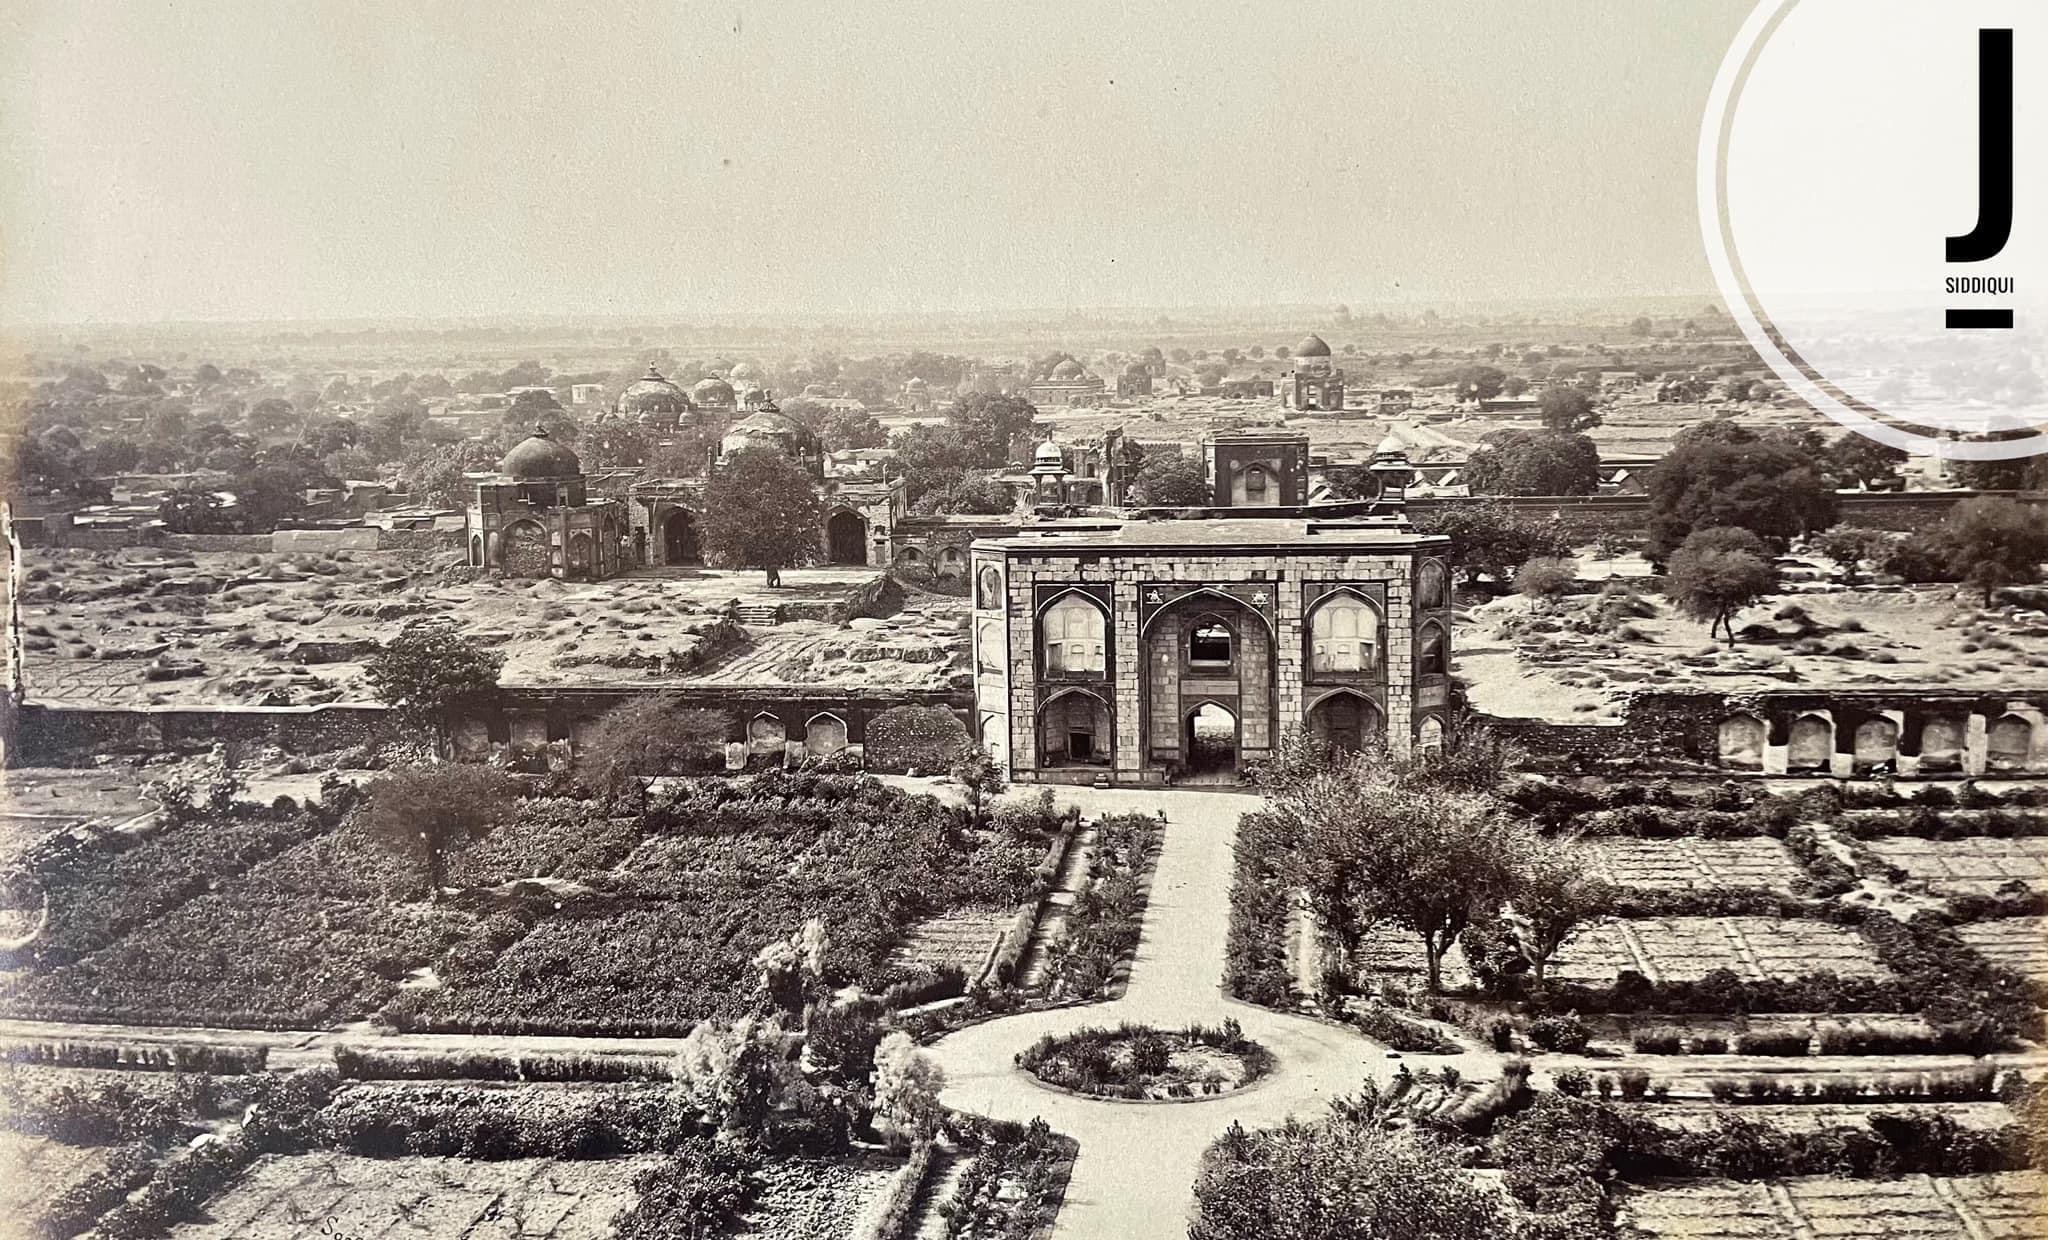 Panoramic shot of Humayun Tomb from the 1860s